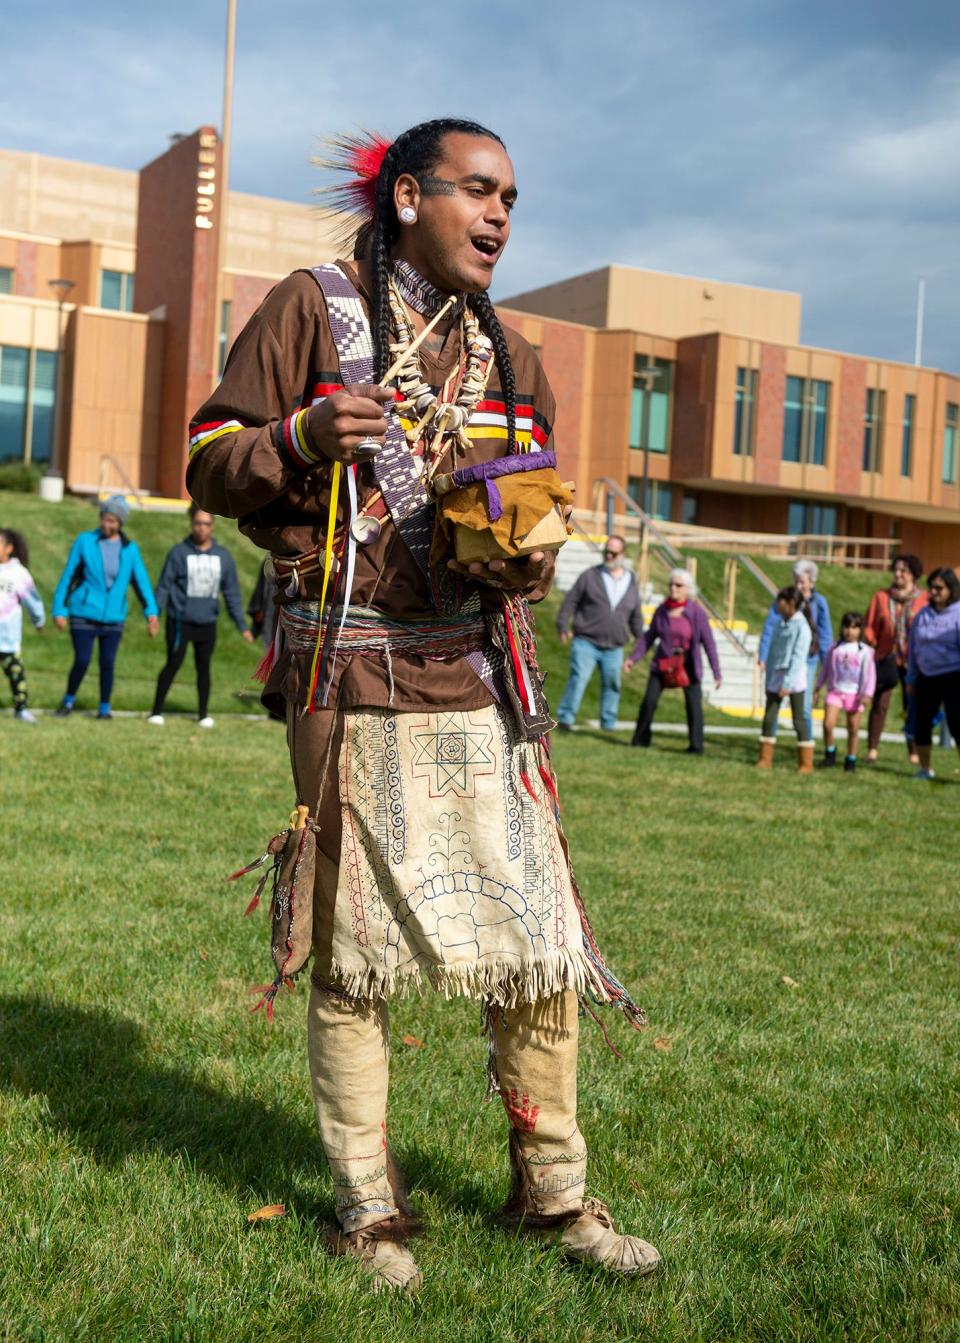 Nipmuc Nation Cultural Steward Andre "Strongbearheart" Gaines, of Grafton, leads a community circle dance at the Fuller Middle School during Framingham Indigenous Peoples' Day Recognition and Celebration, Oct. 10, 2022.